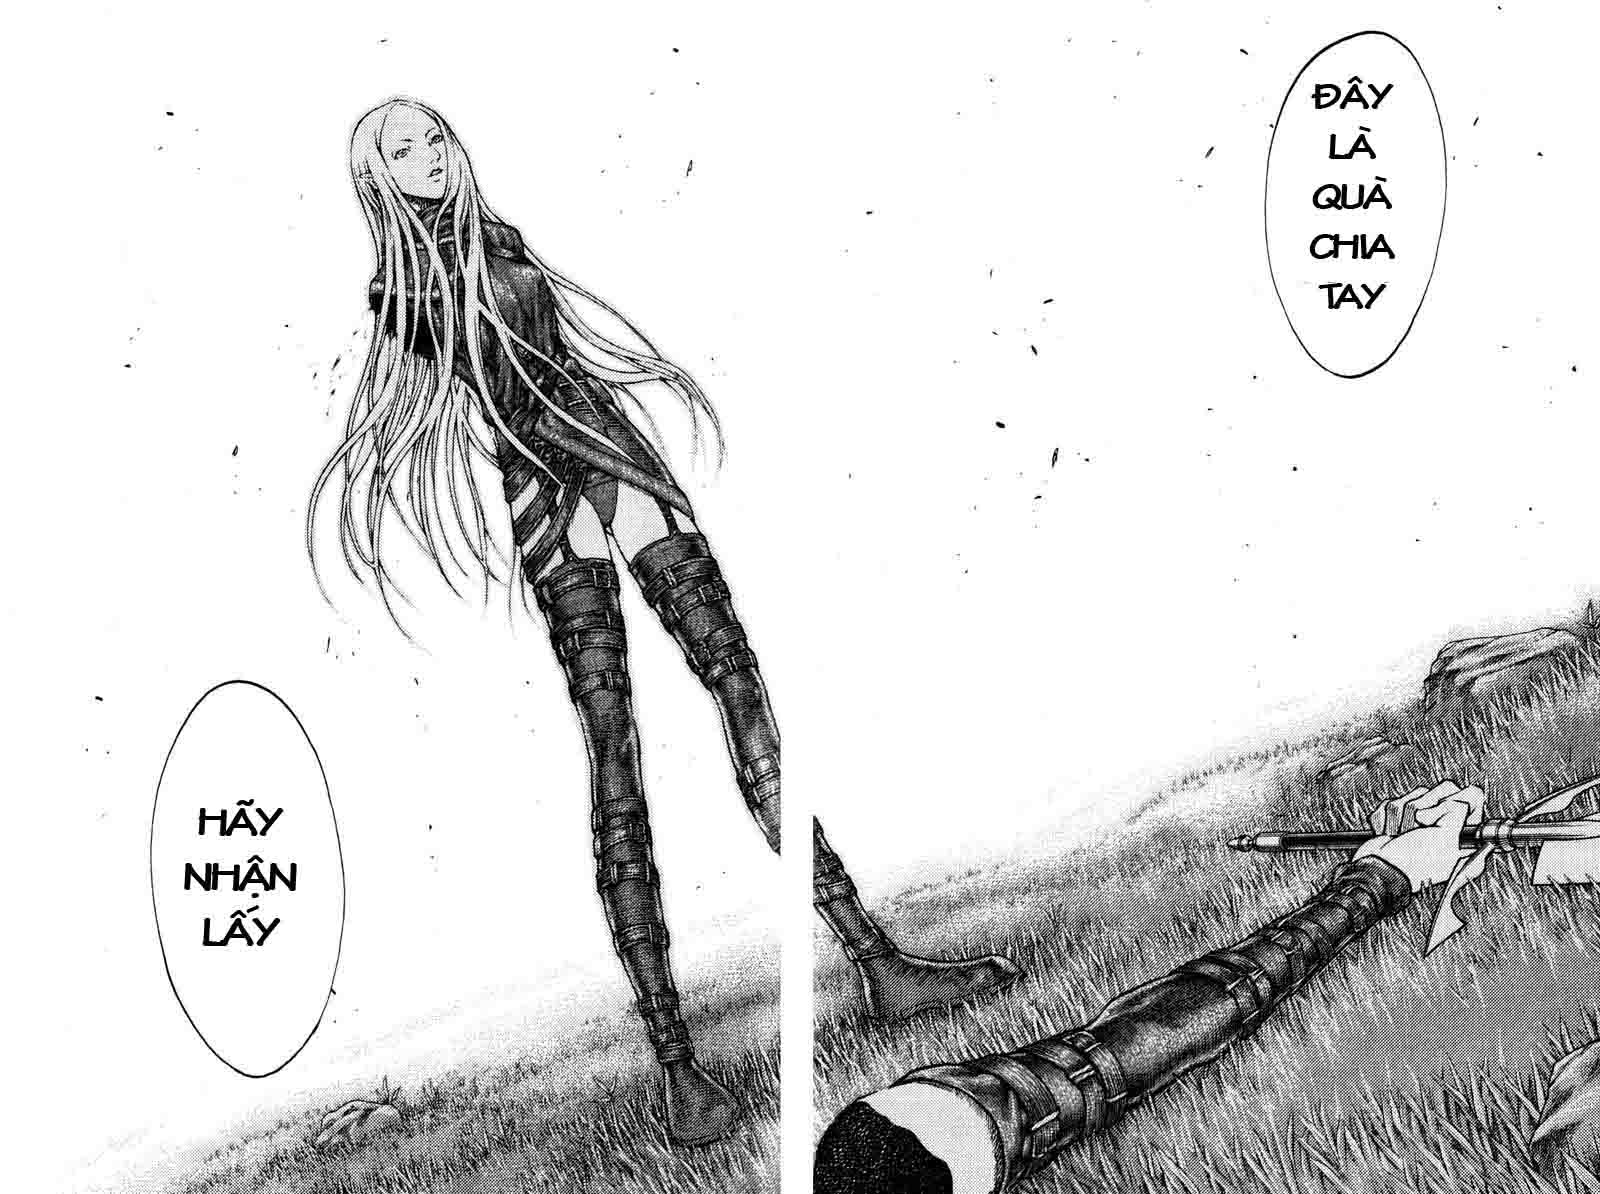 Claymore